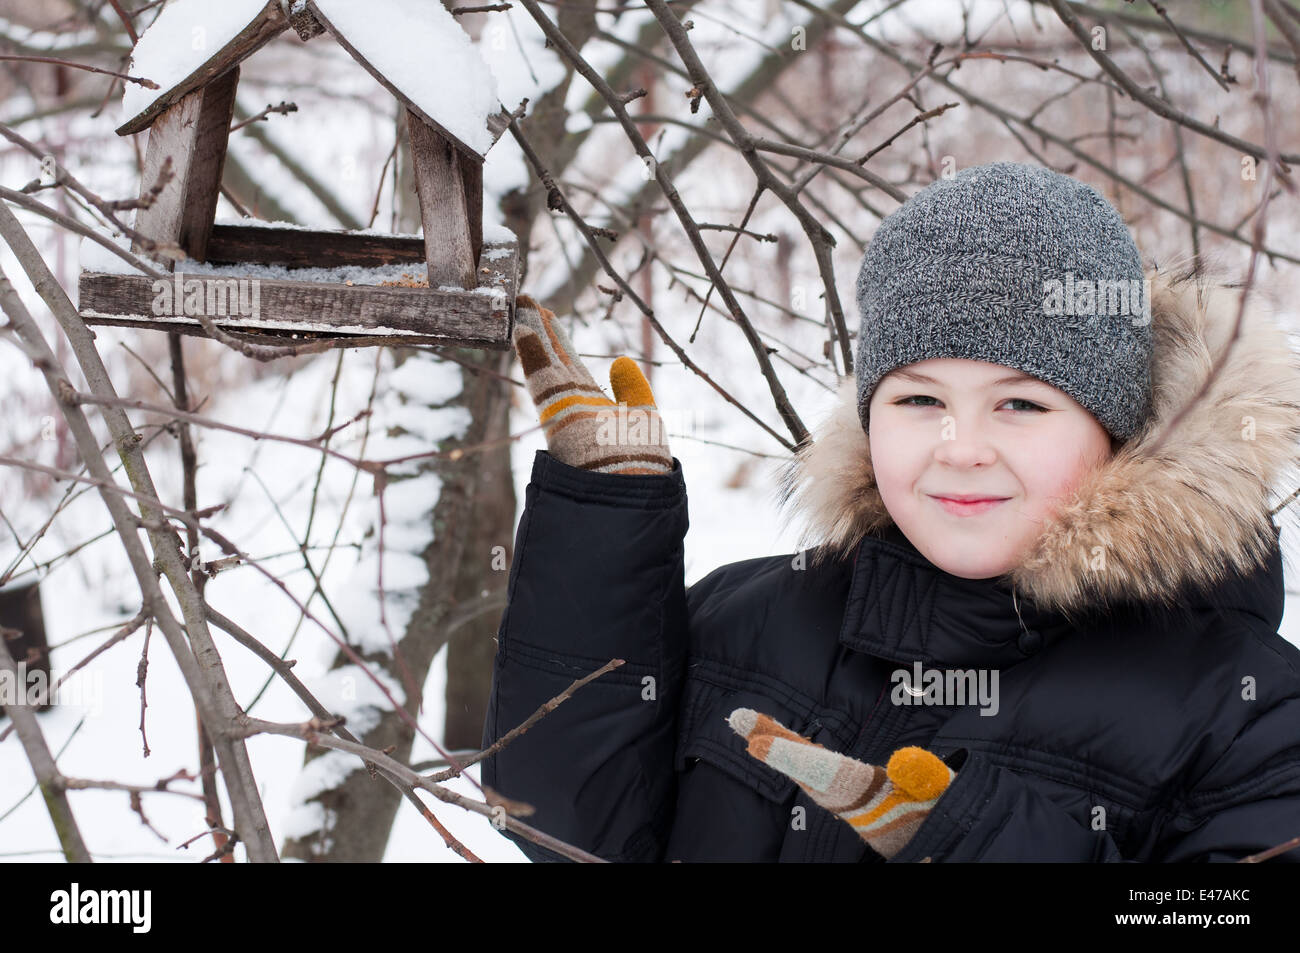 boy child one winter feeding 9 8 years snow snow-covered jacket hat cap feed house garden park forest hanging Russia wood wooden Stock Photo